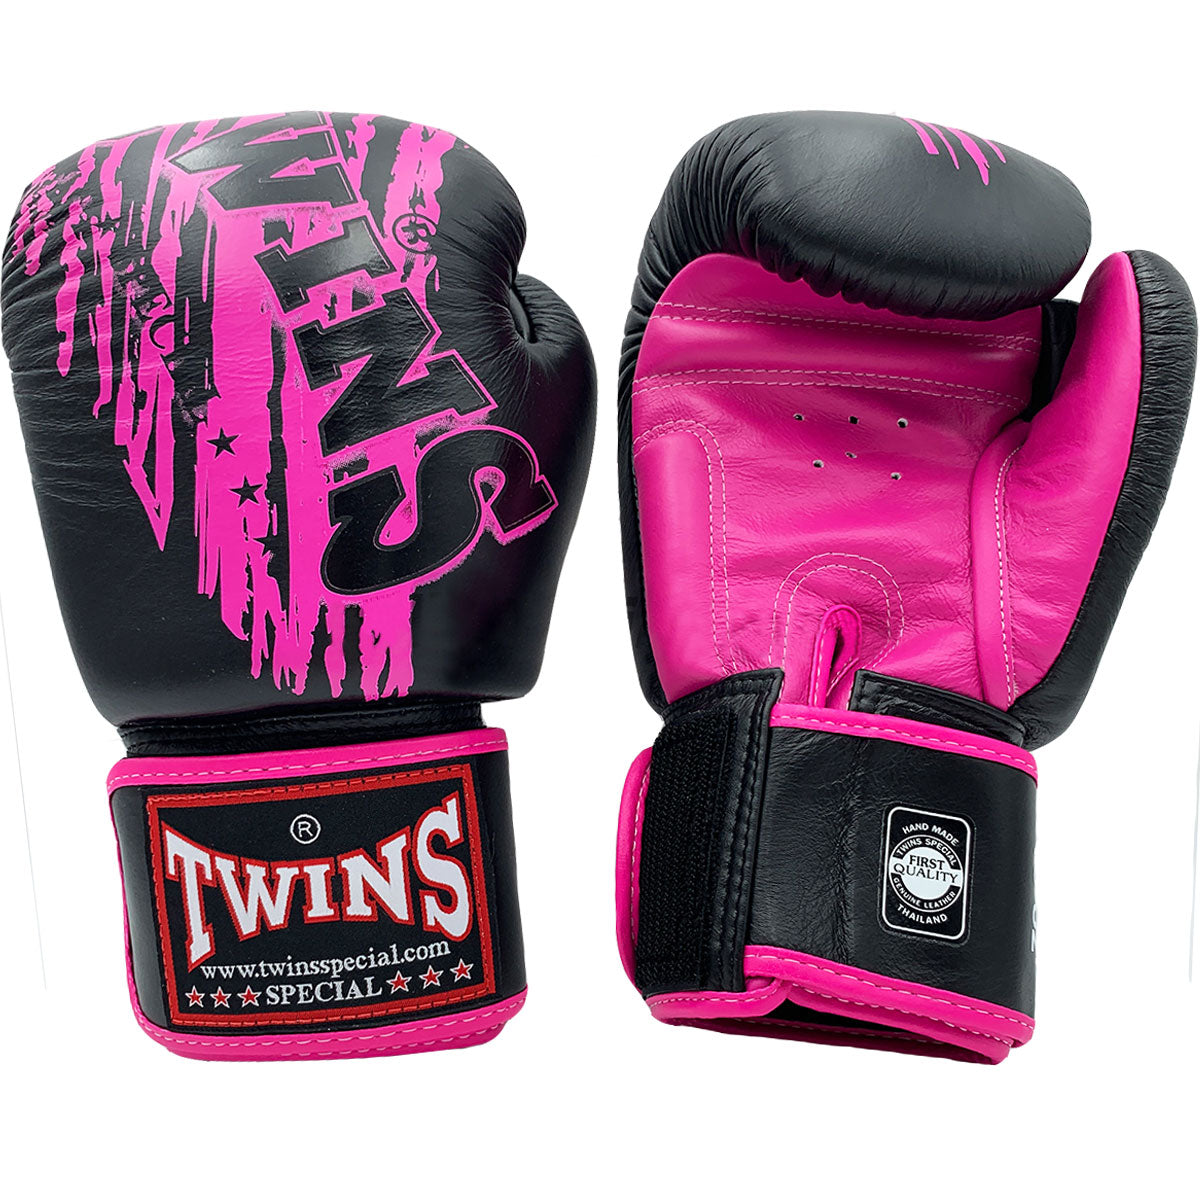 Boxing Gloves Twins Special FBGV-TW3 Black Pink Fancy